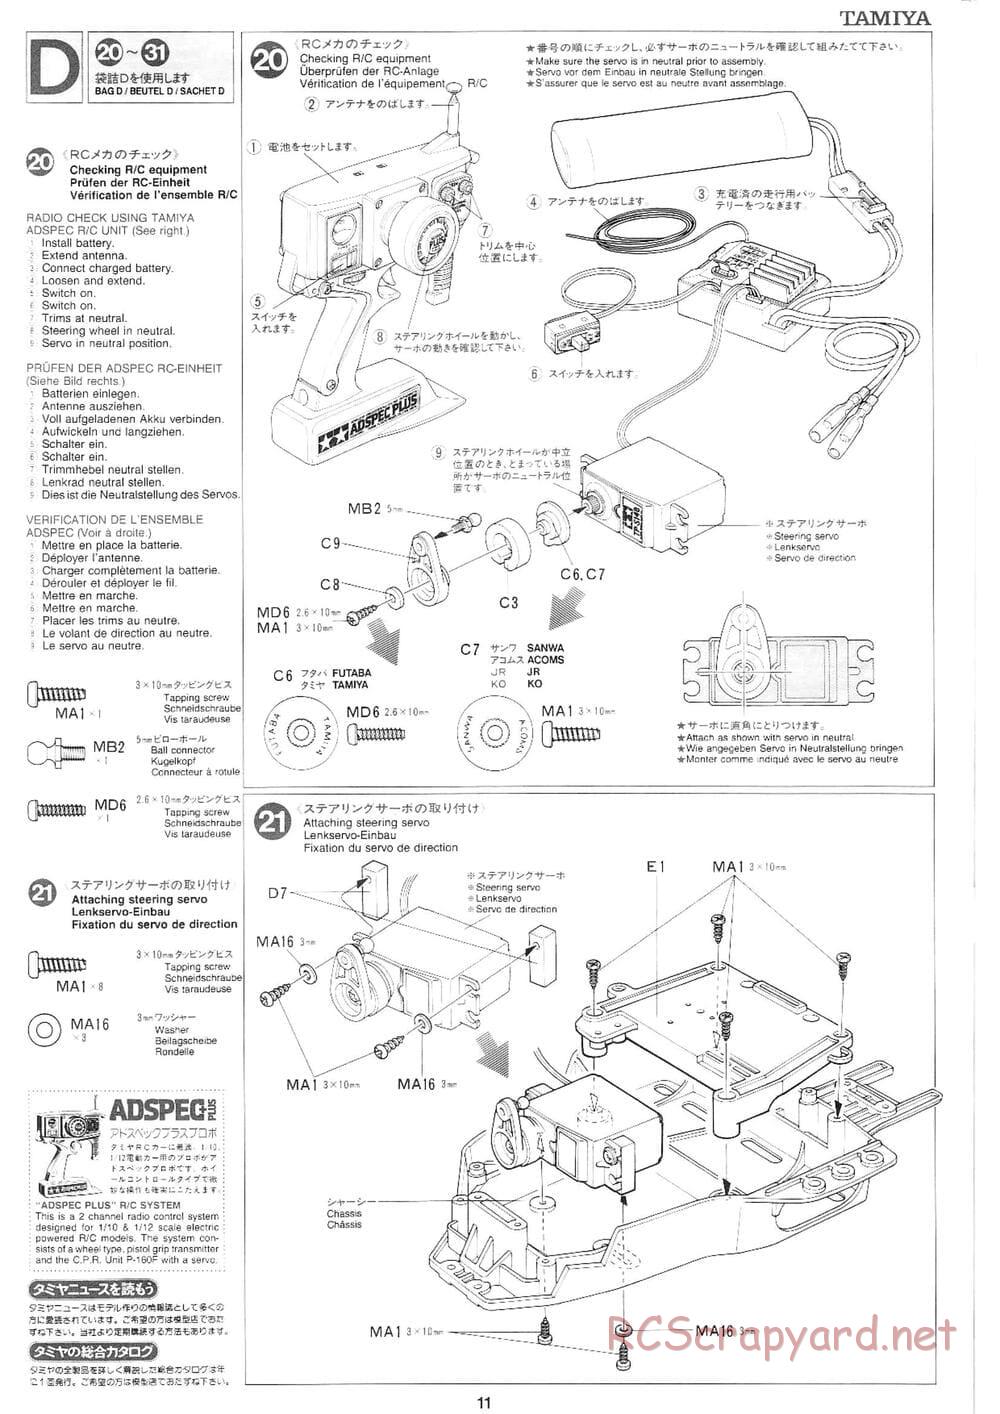 Tamiya - Volkswagen New Beetle - FF-01 Chassis - Manual - Page 9